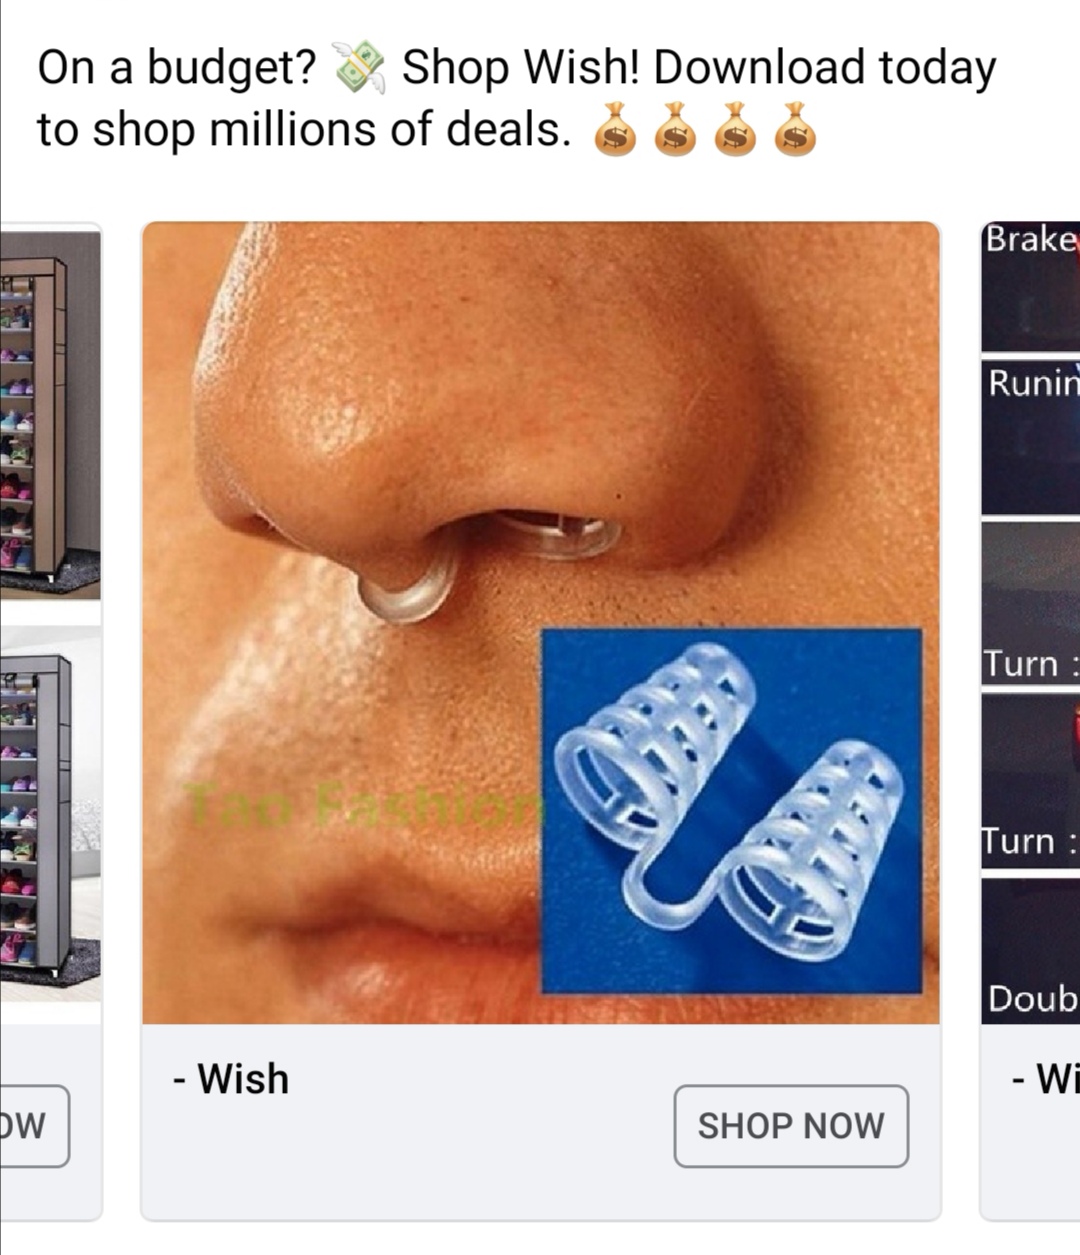 septum piercing - On a budget? Shop Wish! Download today to shop millions of deals. Brake Runin Turn Turn Doub Wish We Dw Shop Now